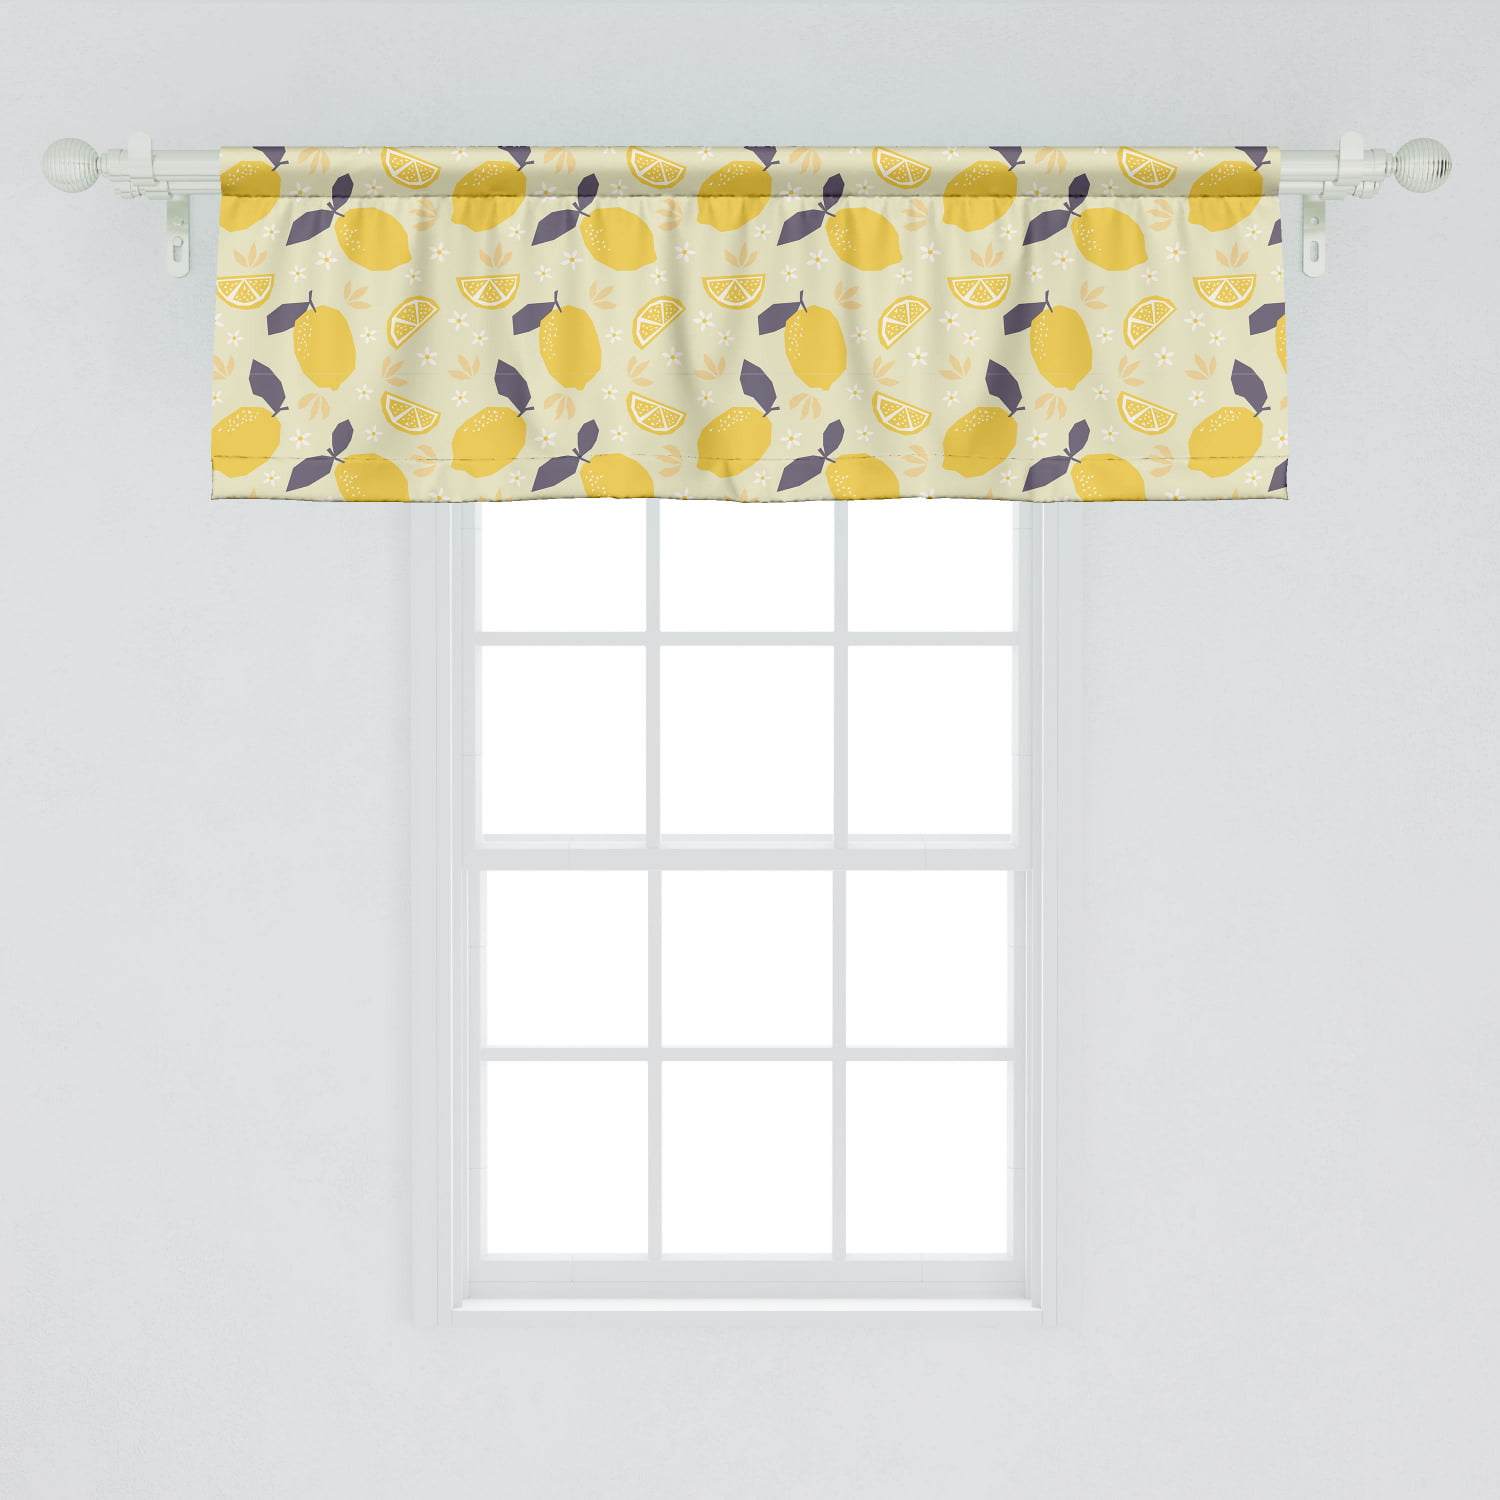 Ambesonne Fruit Art Window Valance, Lemons and Blossoms Floral Pattern with  Whole and Sliced Citrus Summer, Curtain Valance for Kitchen Bedroom Decor  ...